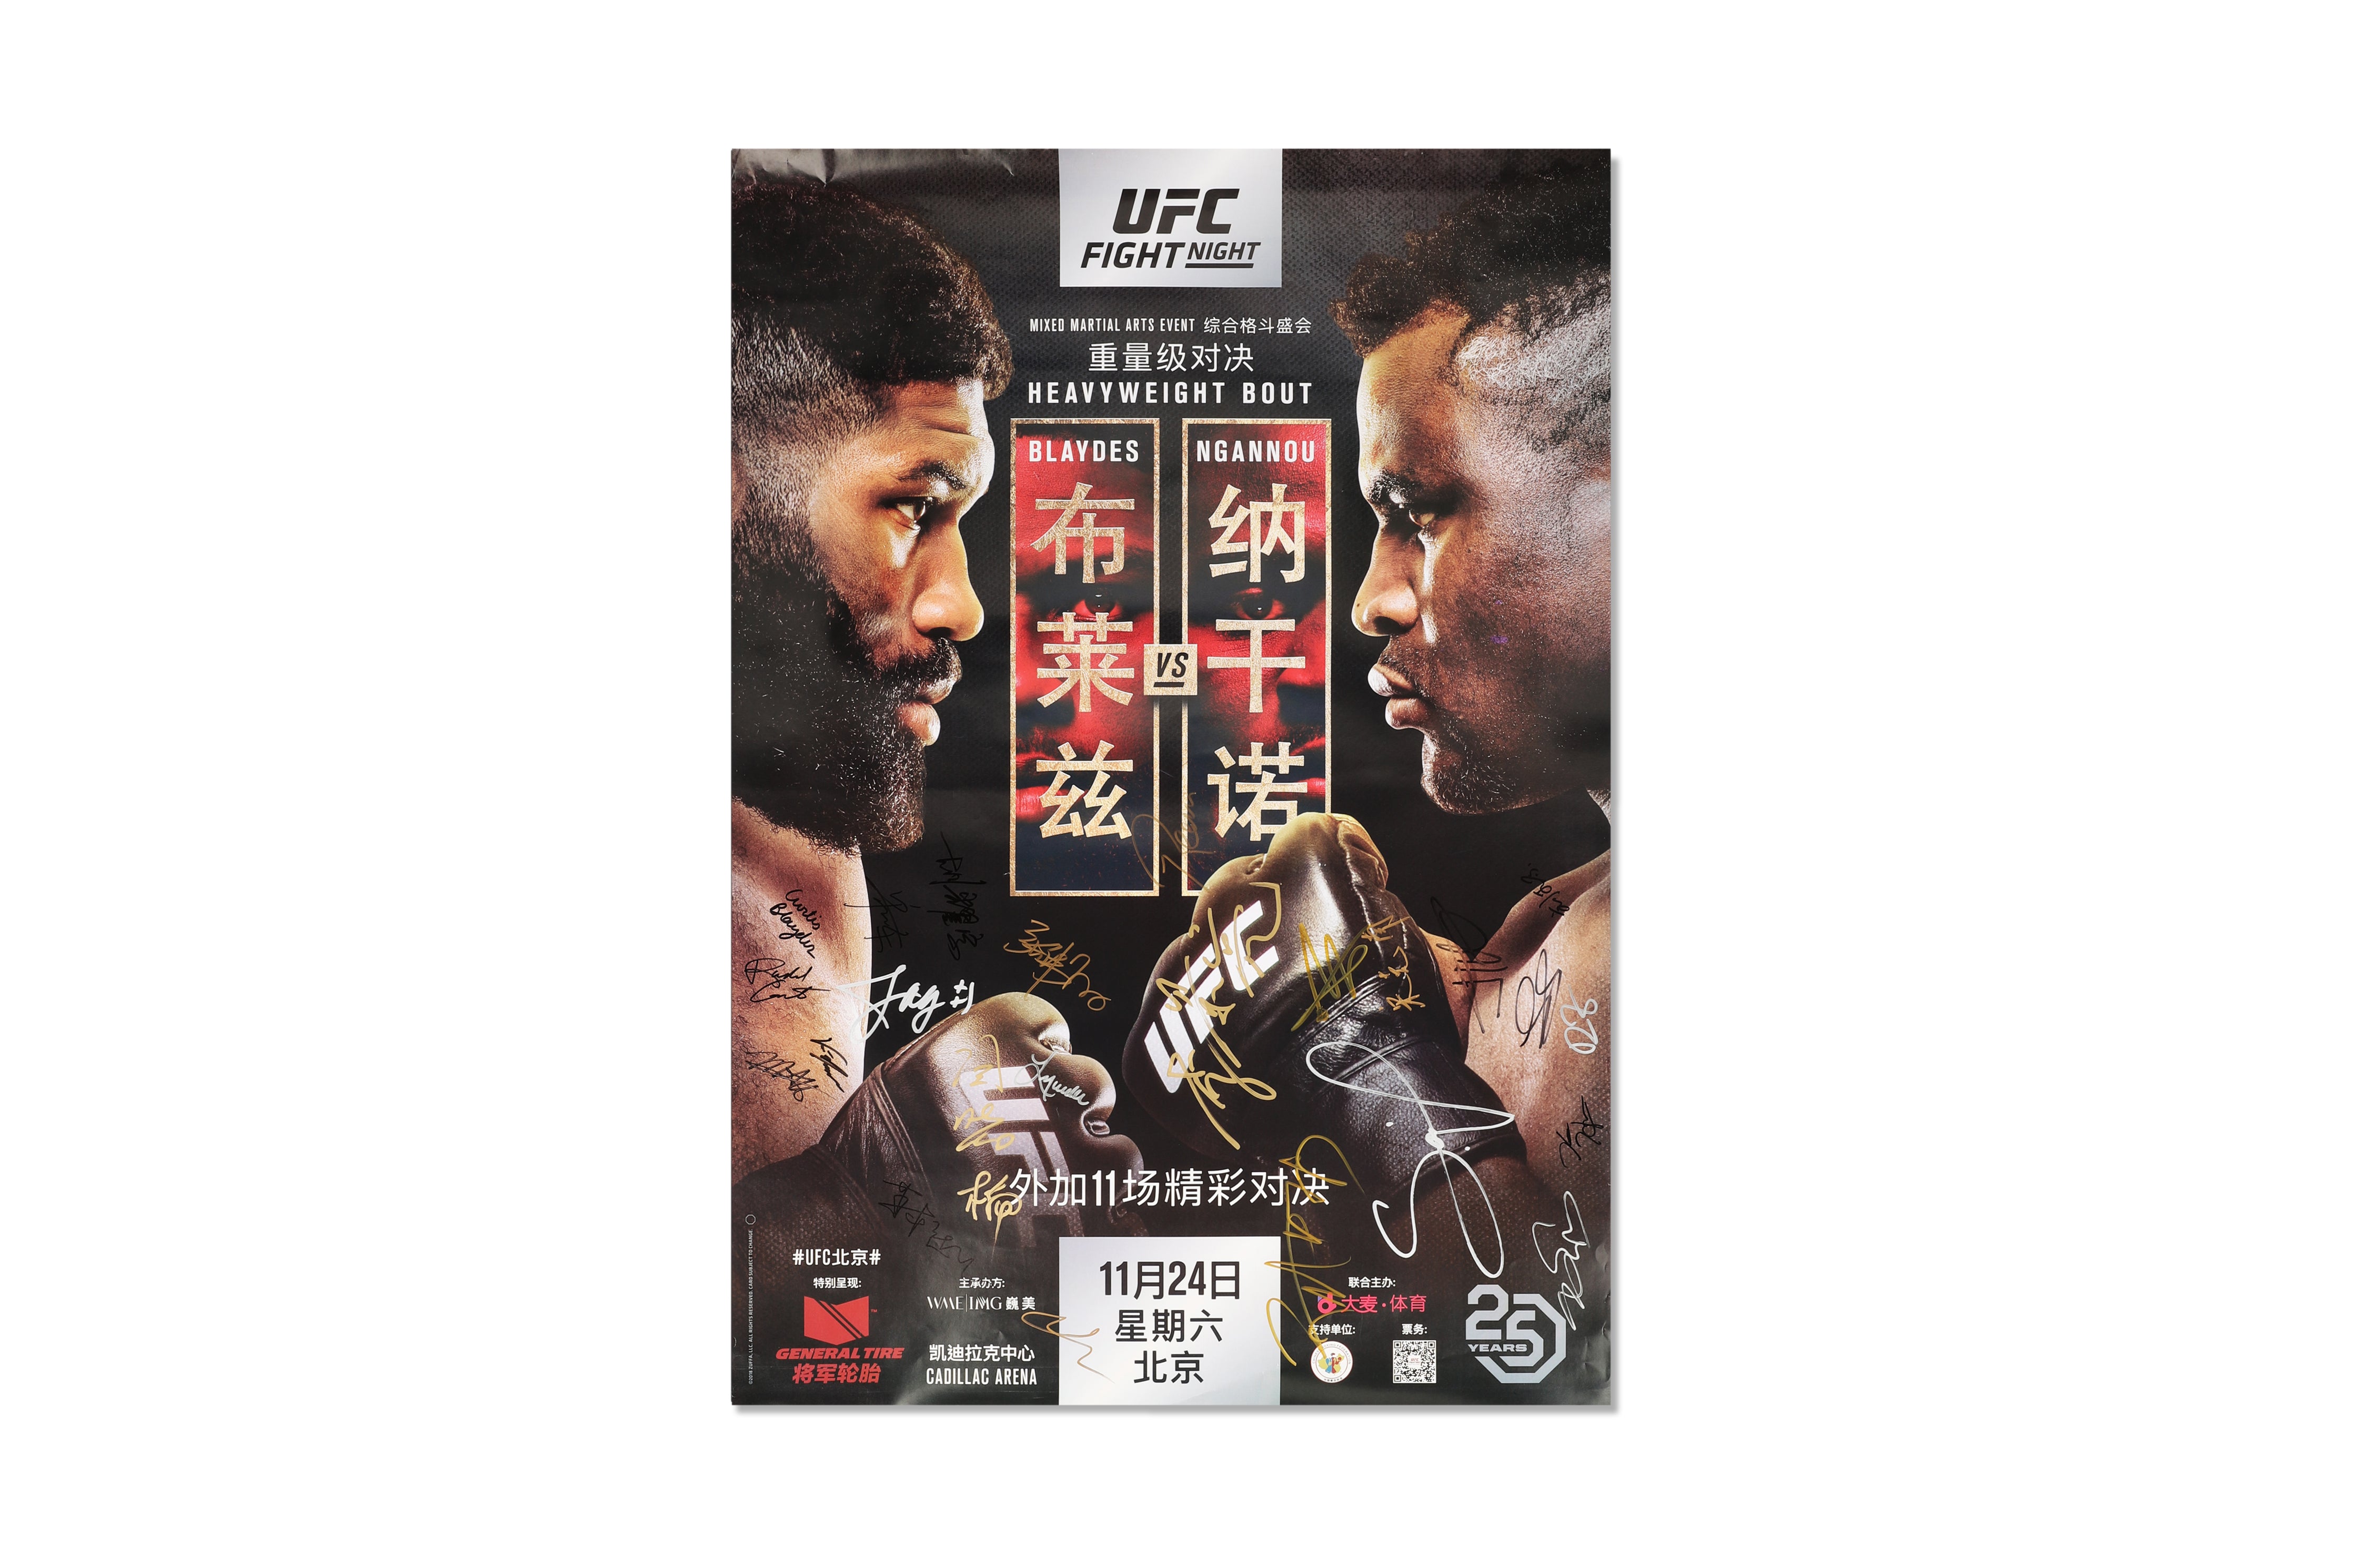 UFC Fight Night: Blaydes vs Ngannou 2 (FN 141) Autographed Event Poster